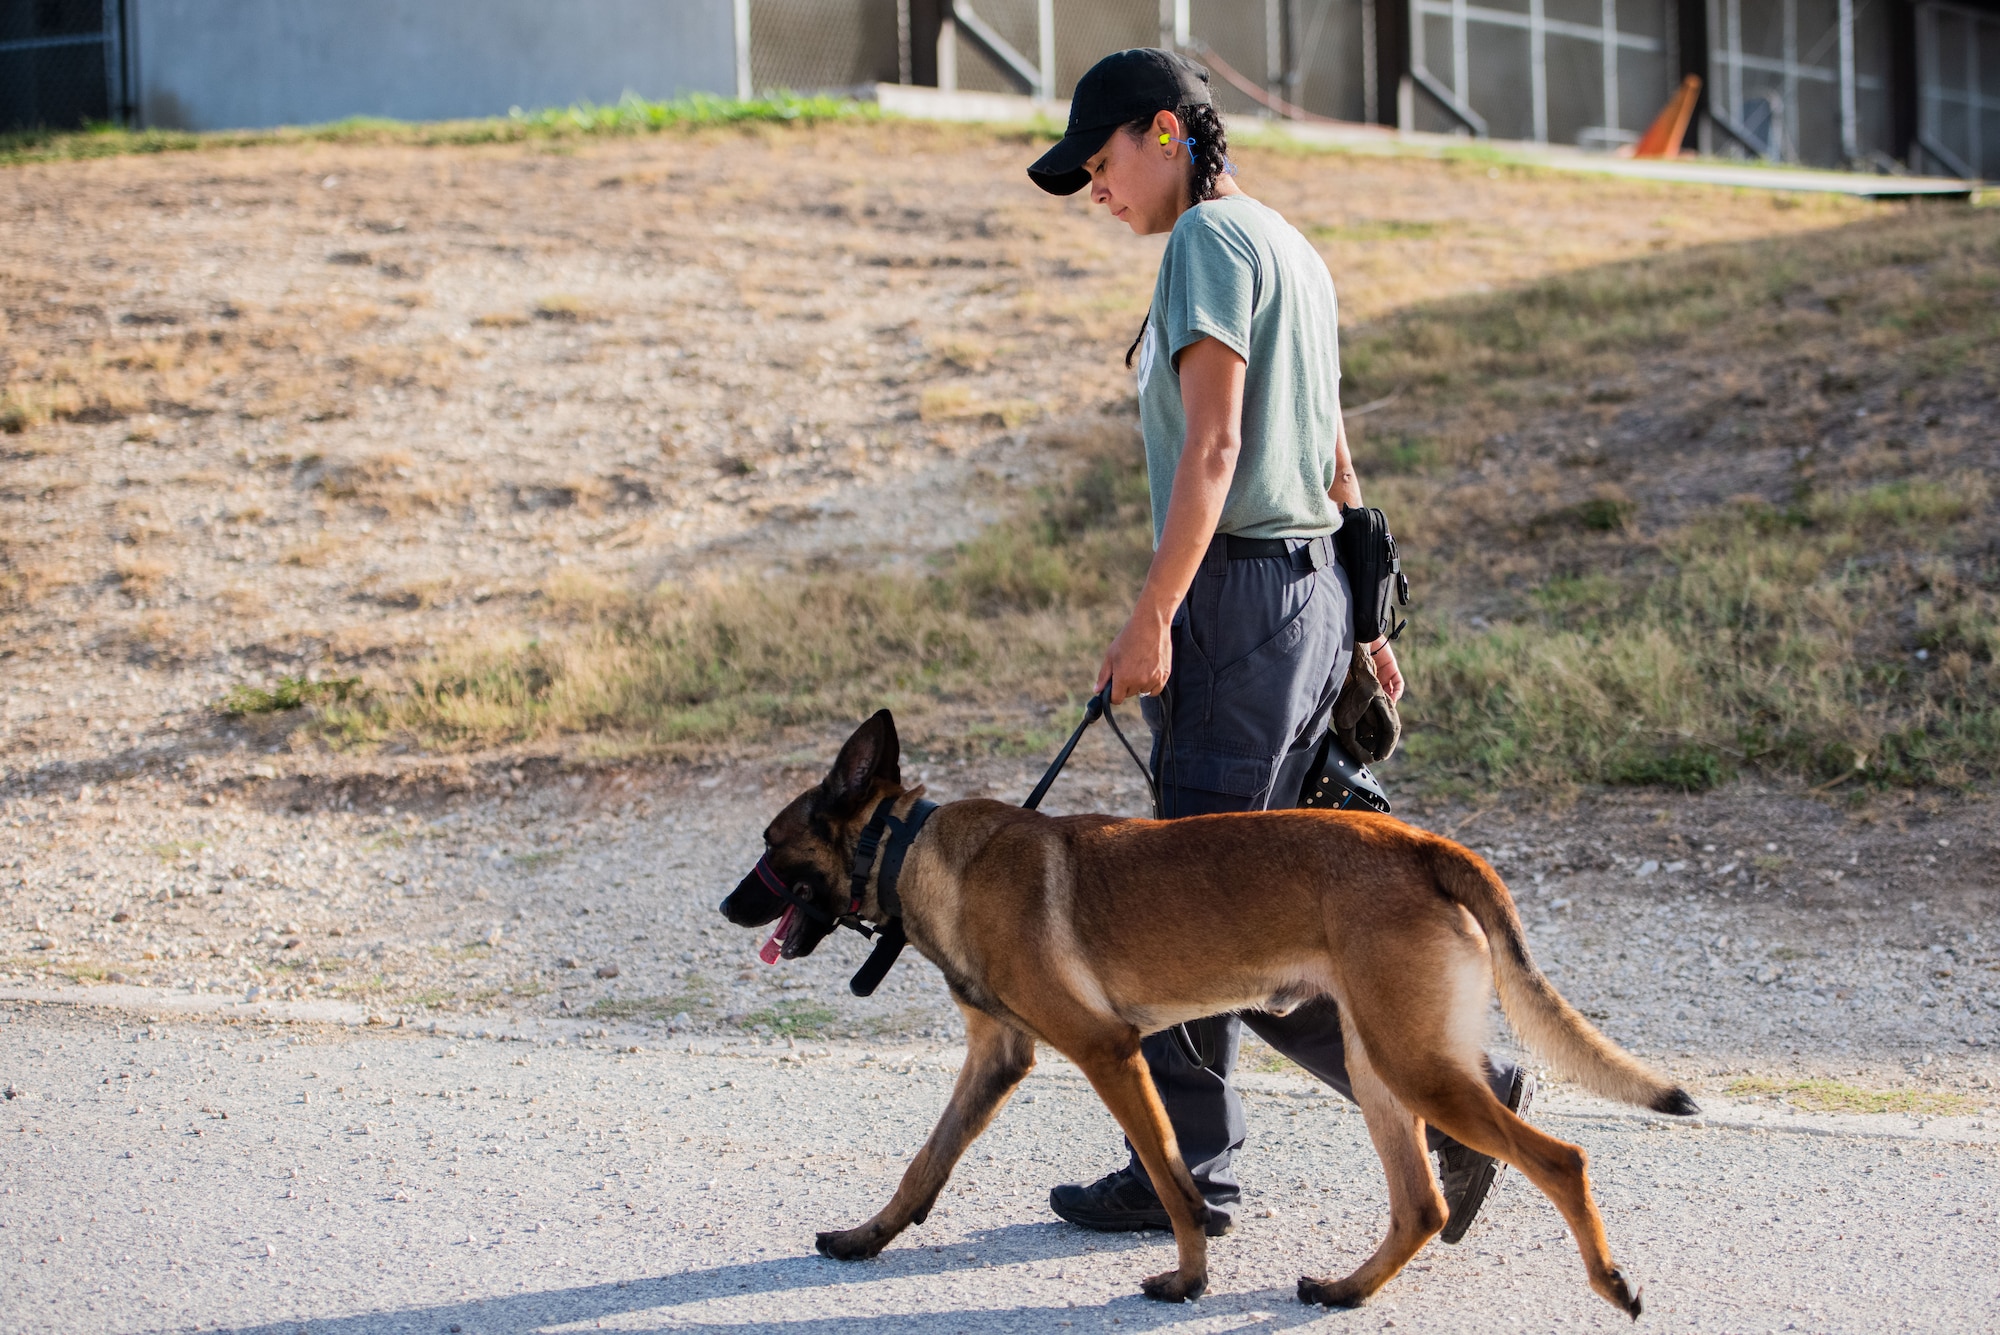 341st Training Squadron implements gentle leaders for MWDs